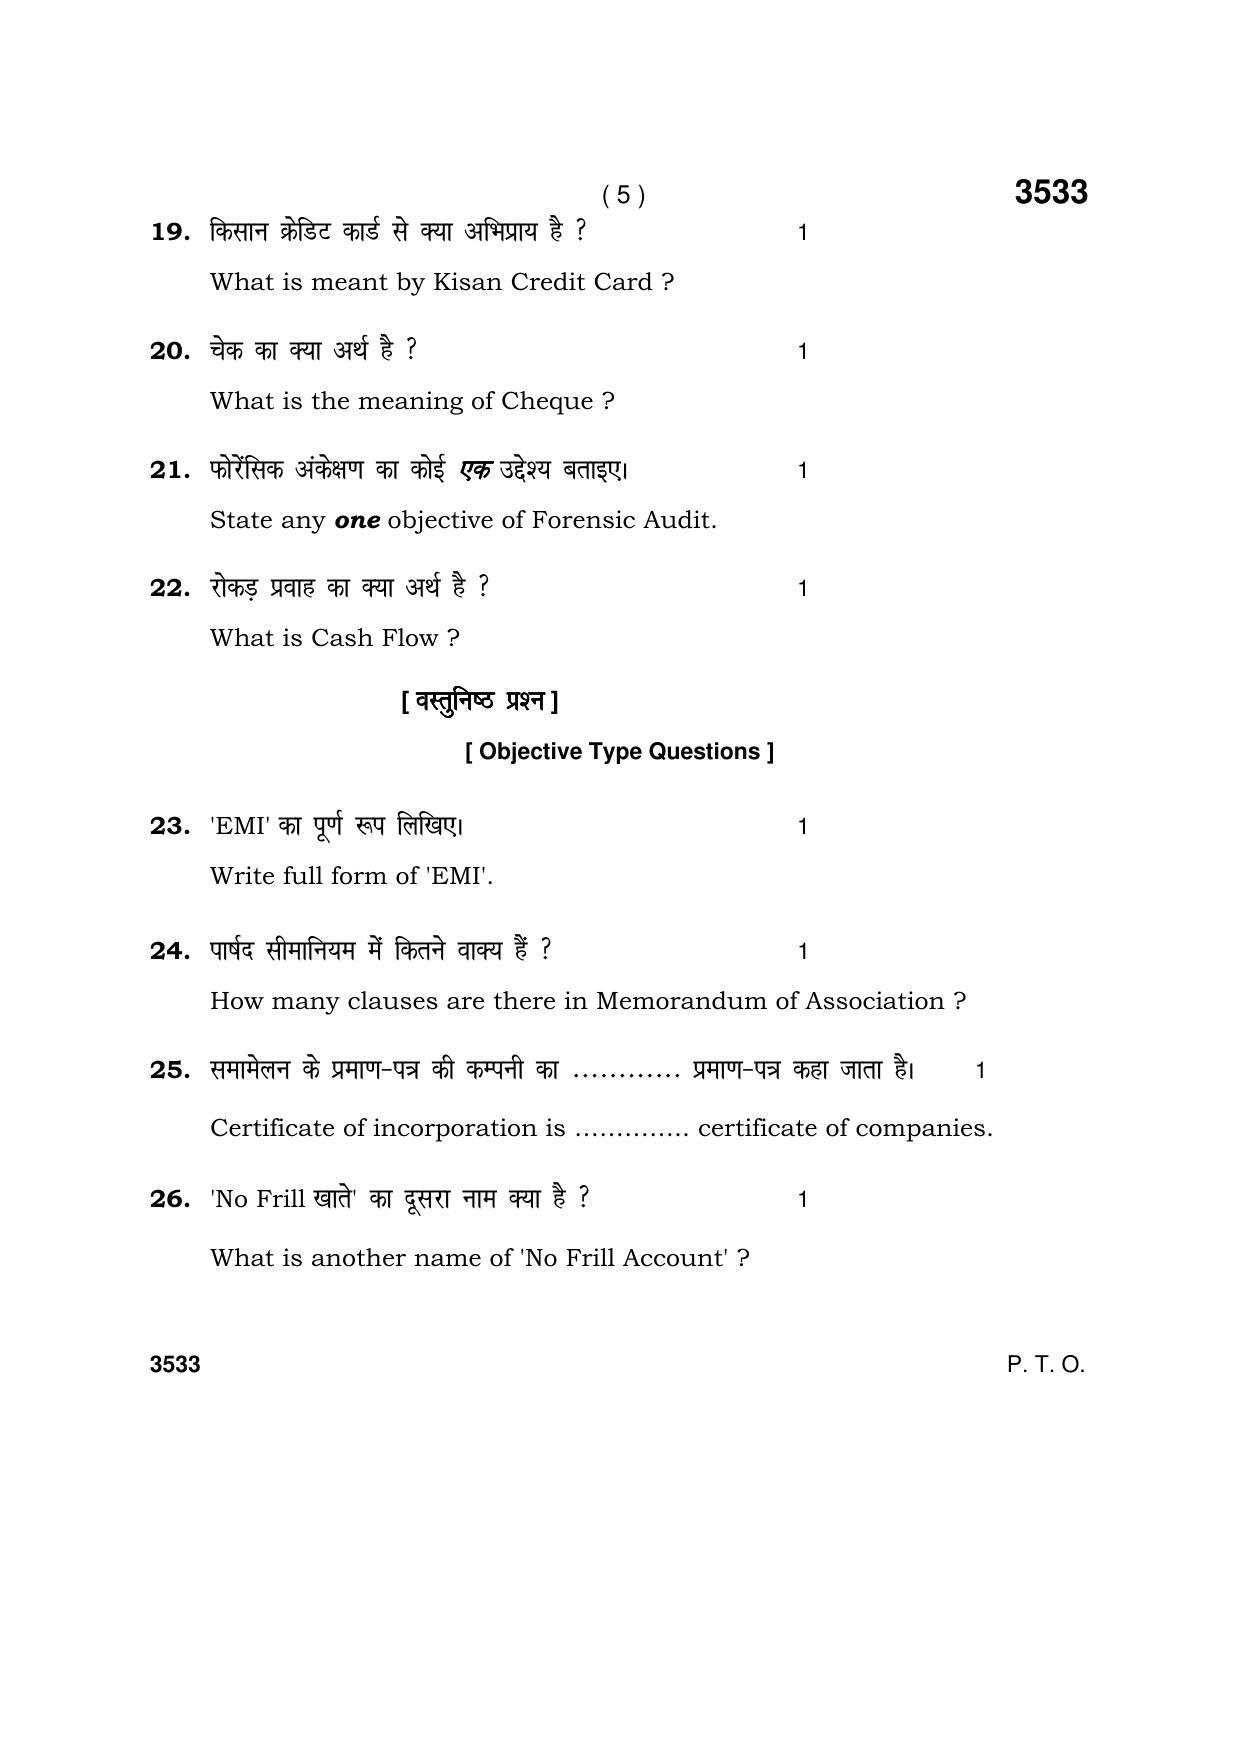 Haryana Board HBSE Class 10 Banking & Financial Services 2018 Question Paper - Page 5